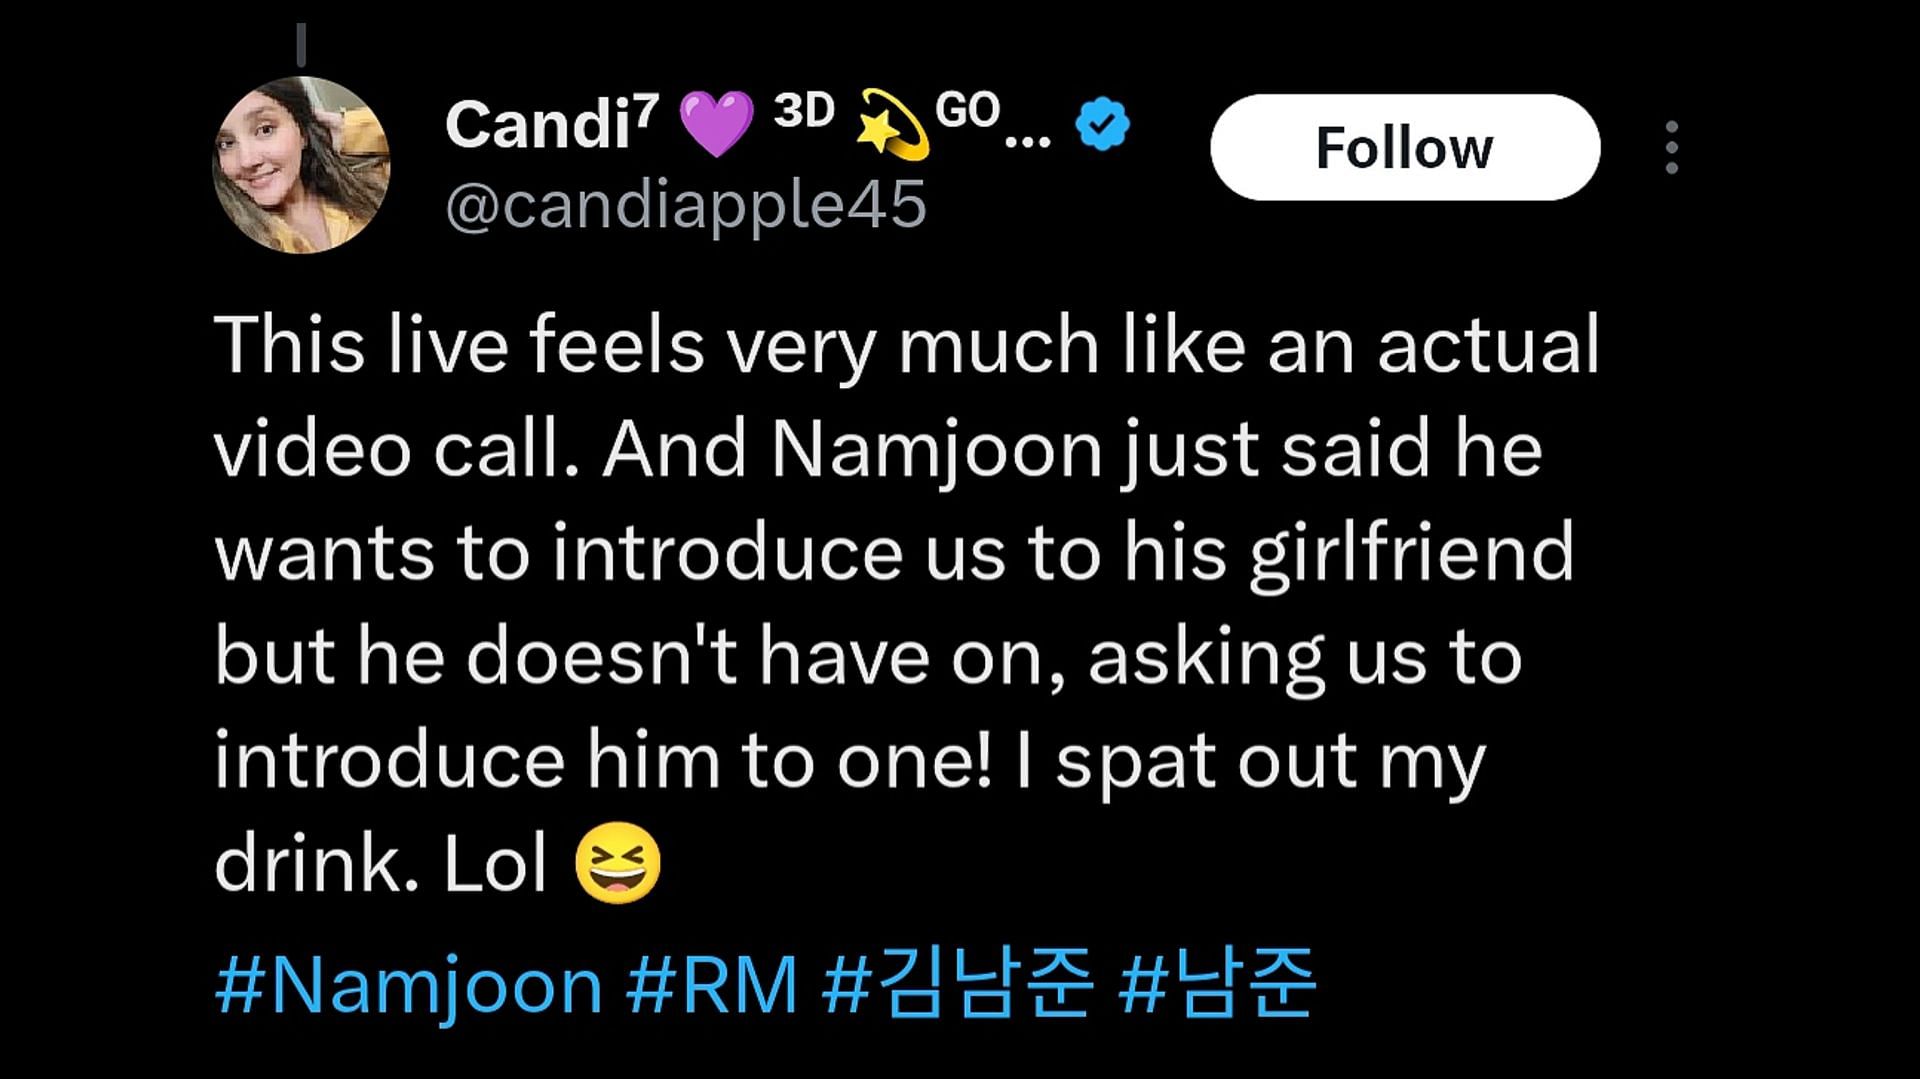 ARMYs reaction to the idol asking fans to introduce him to the potential partner(Image via X/@candiapple45)